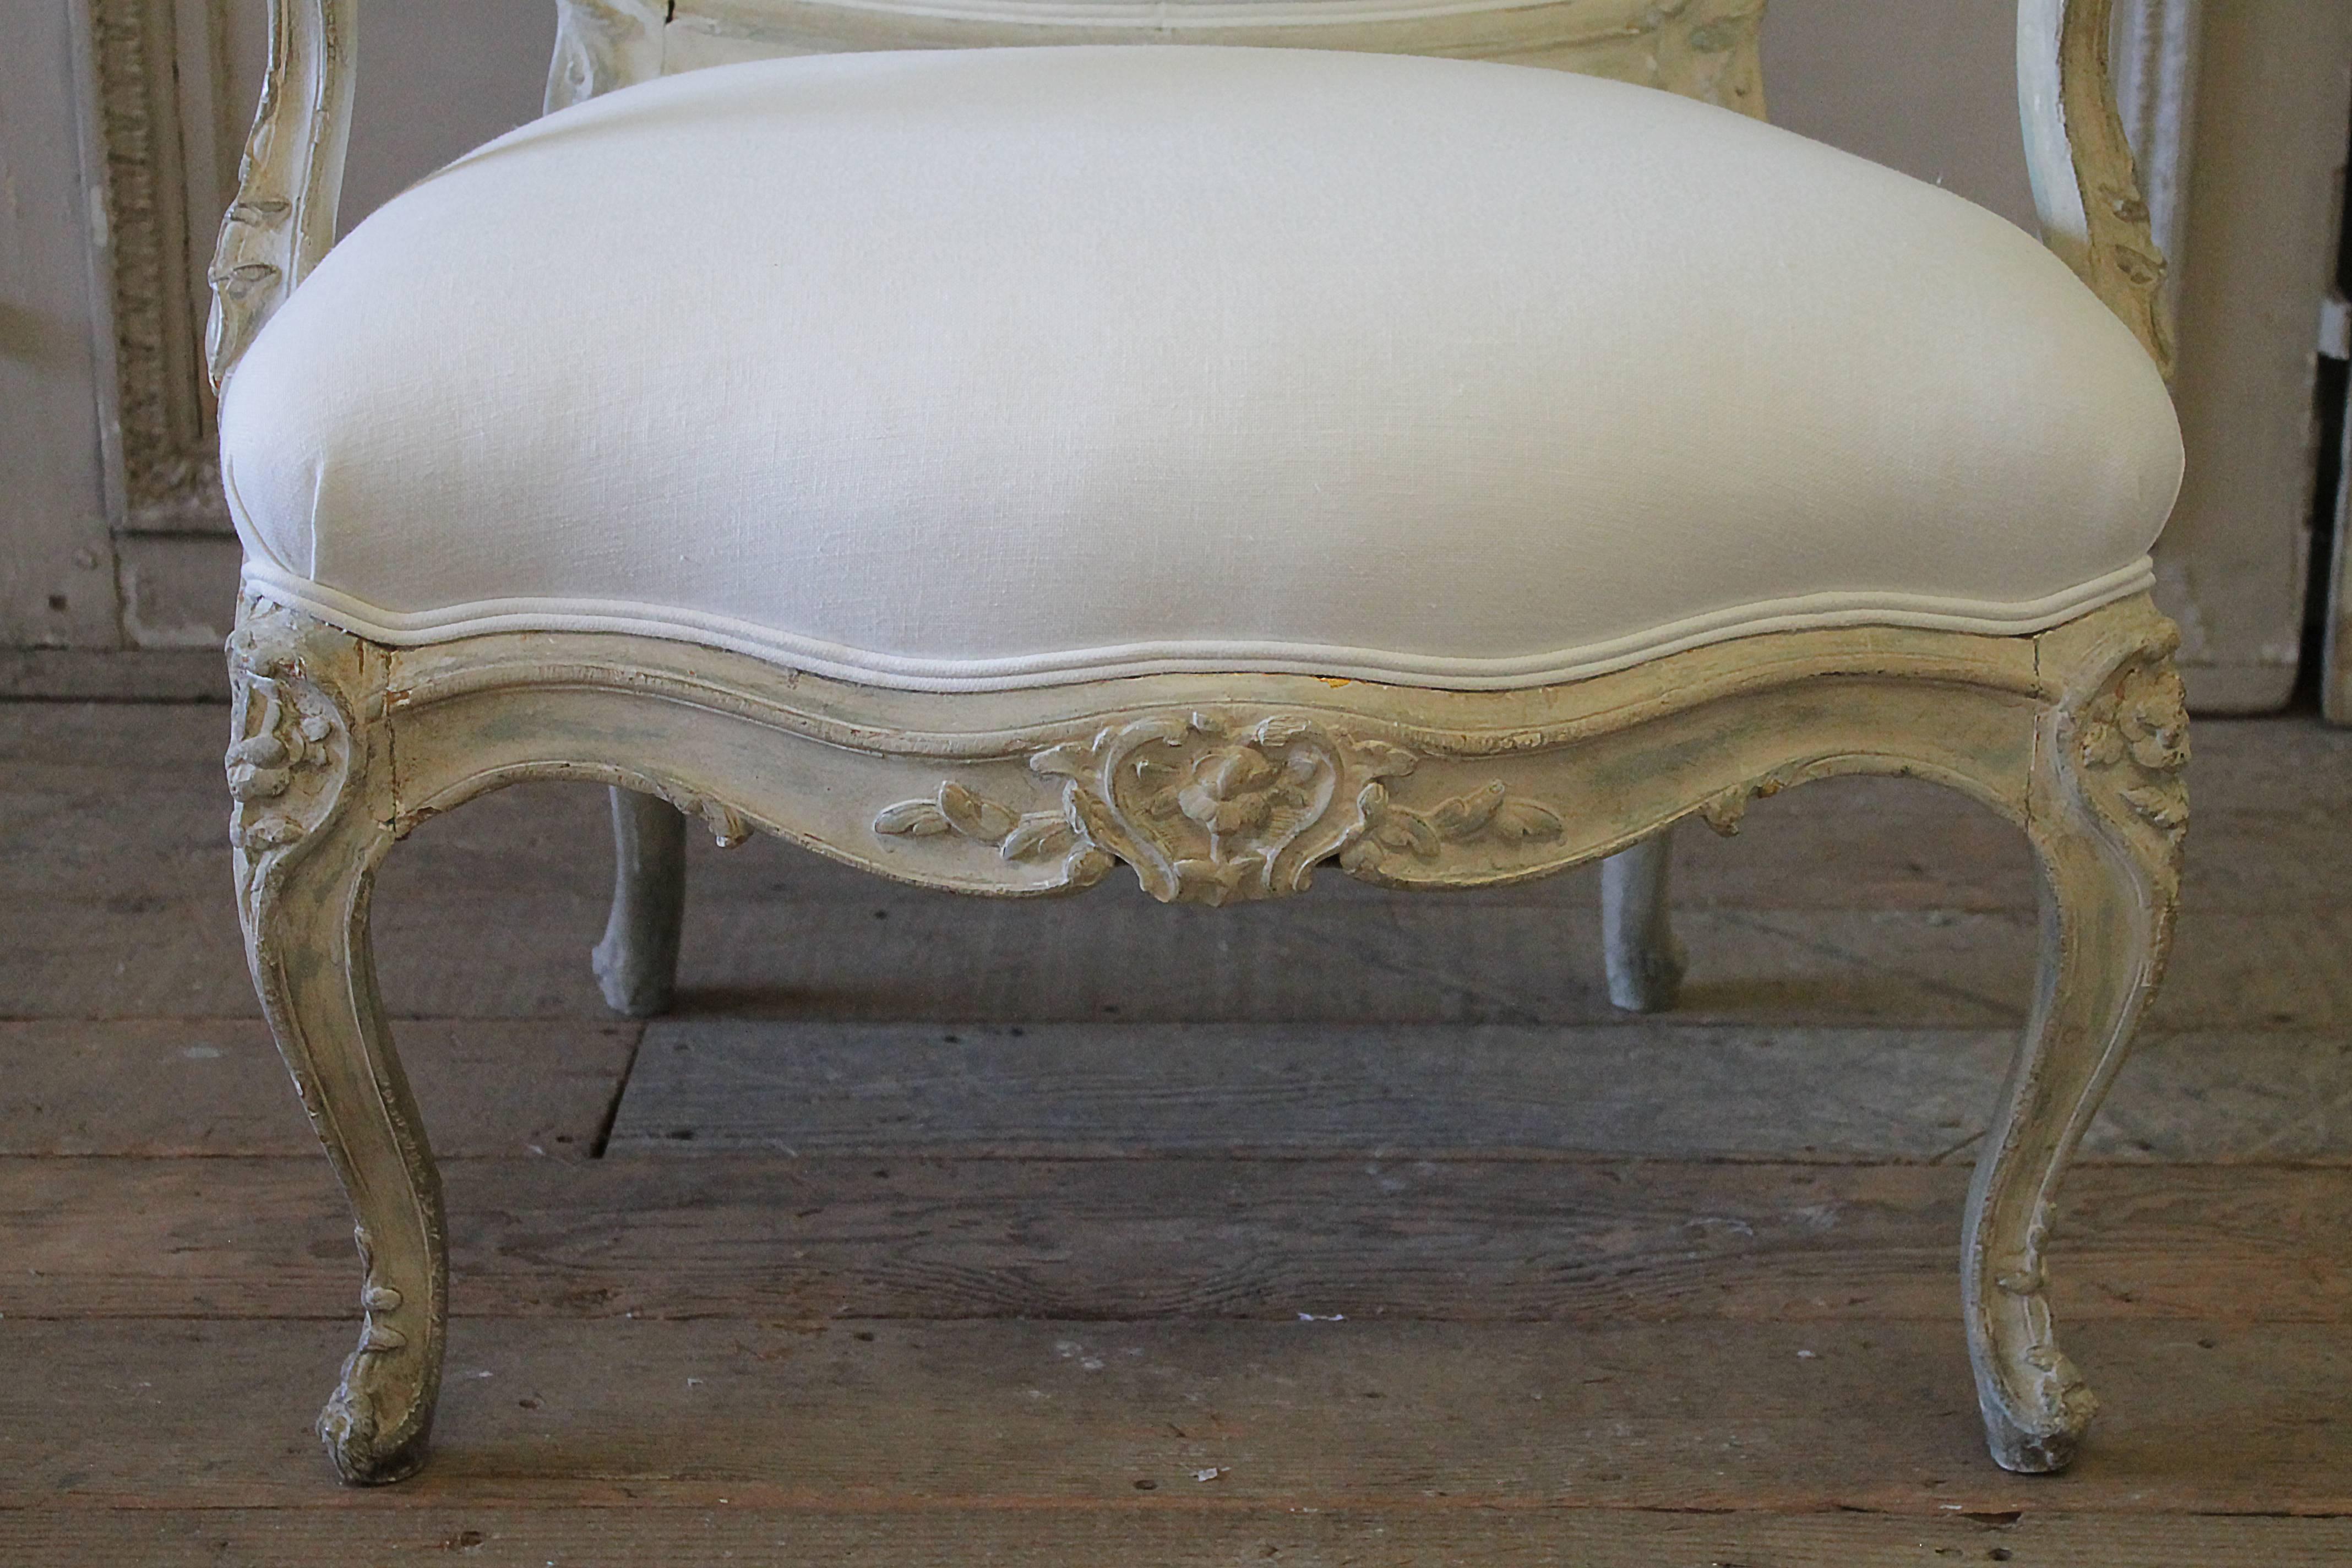 Antique Louis XV Style Fauteuil Painted and Upholstered in Belgian Linen 1